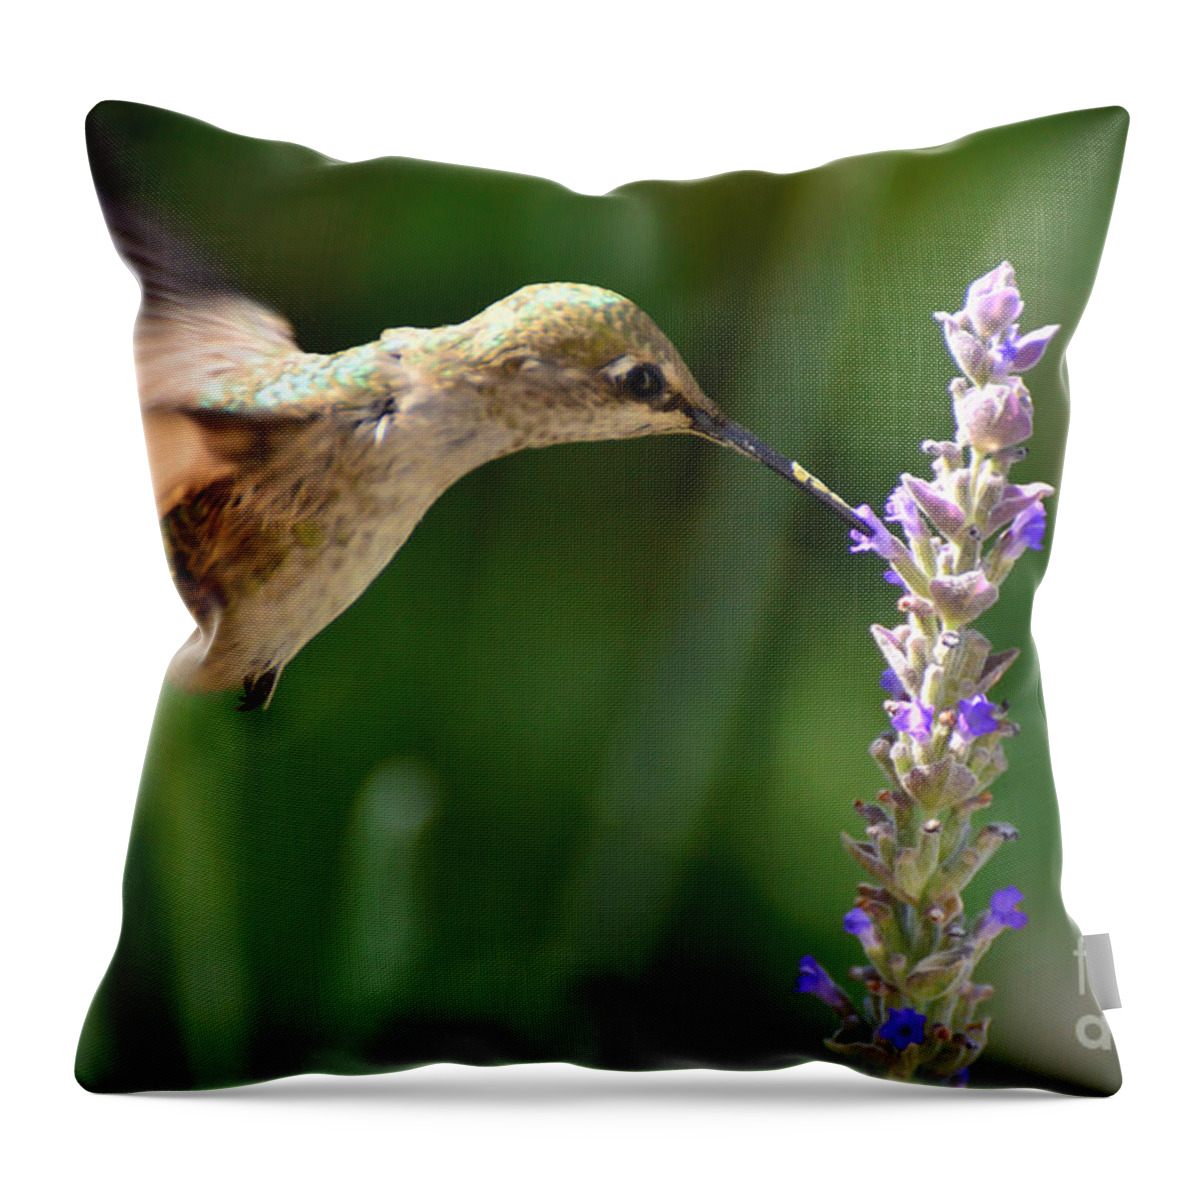 Pollination Throw Pillow featuring the photograph Light Filters Behind the Hummer by Debby Pueschel